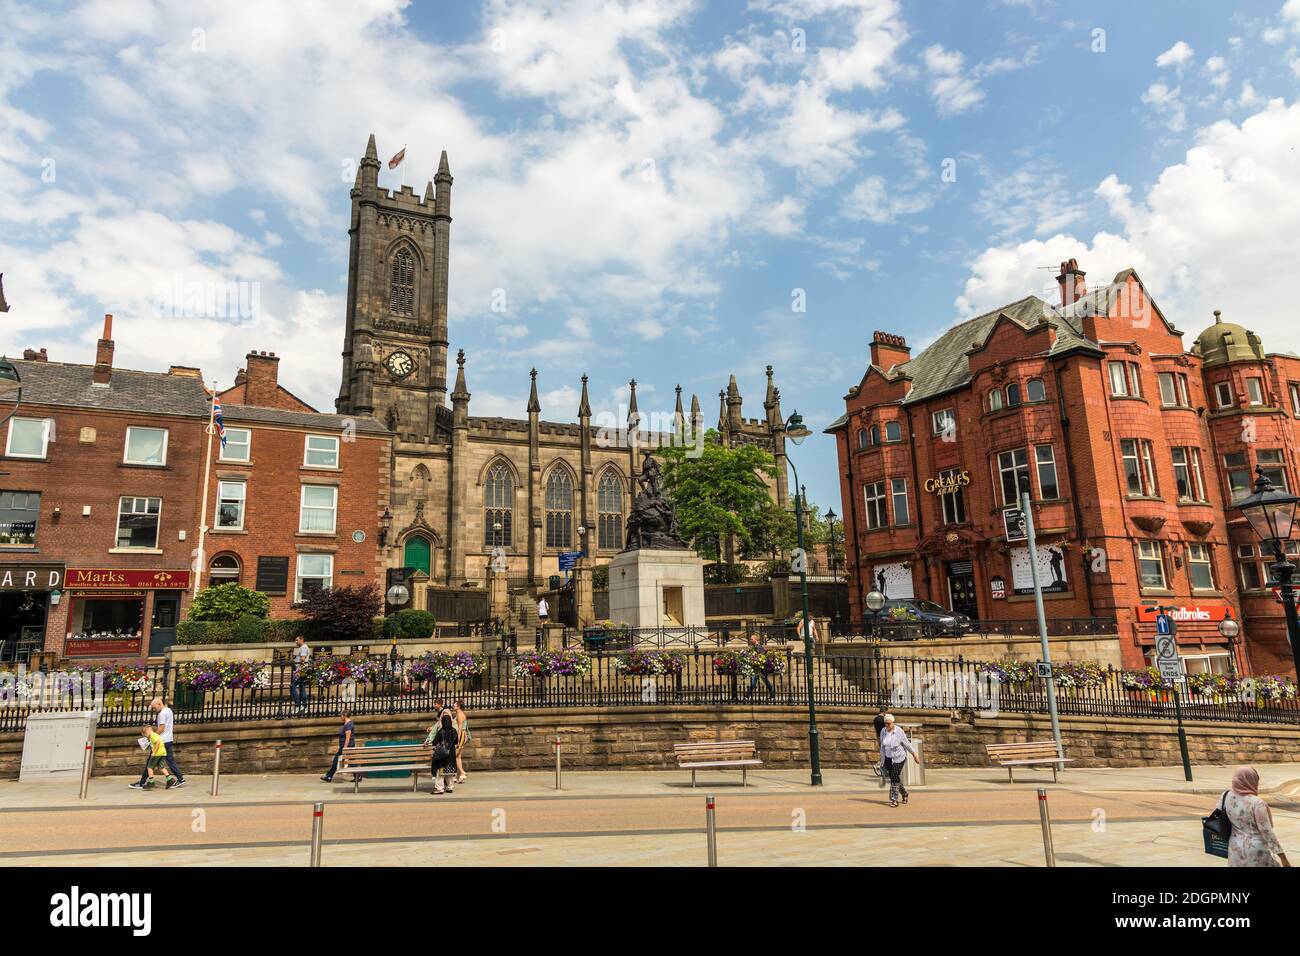 Cityscape of Oldham town centre, UK with Oldham Parish Church and War Memorial. Stock Photo